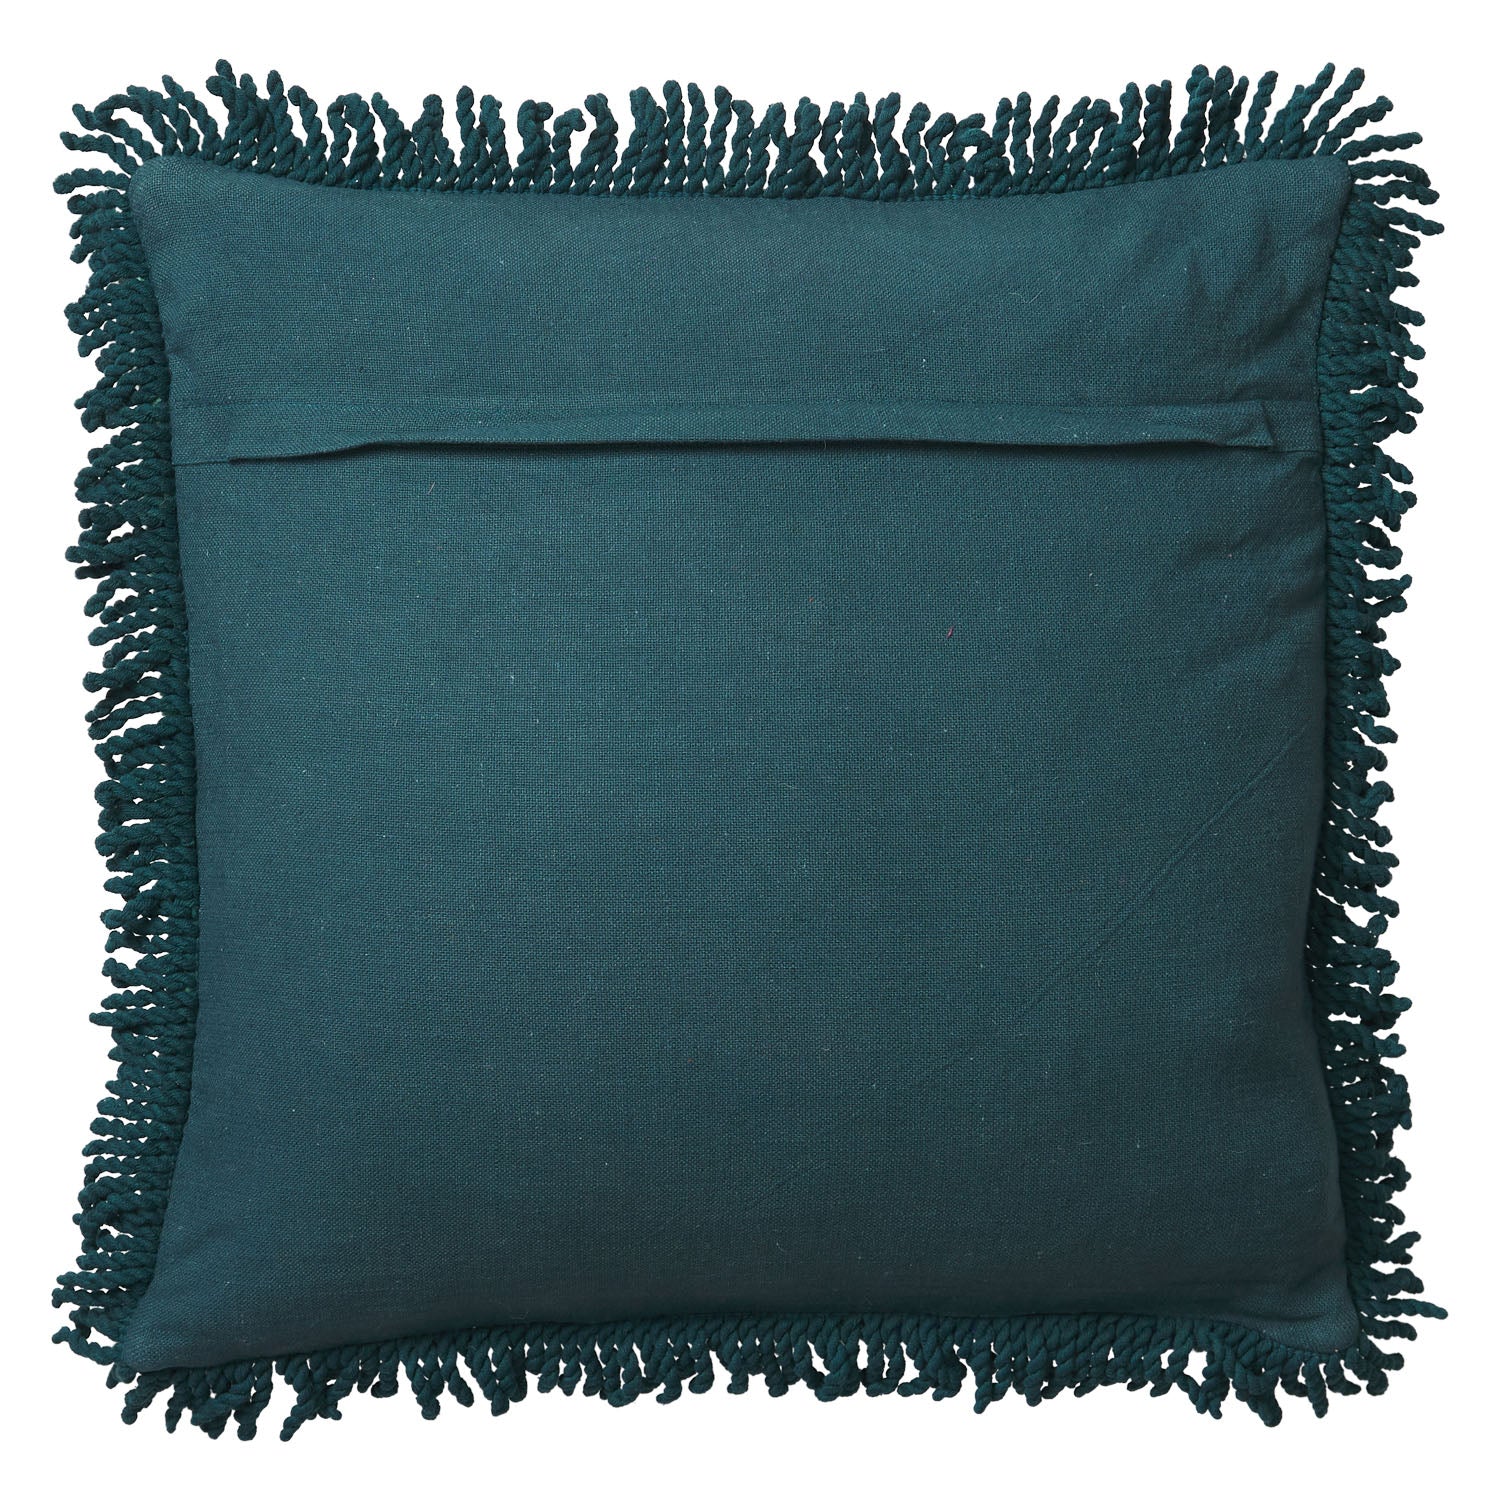 Cedro Punch Needle Cushion Peacock by 